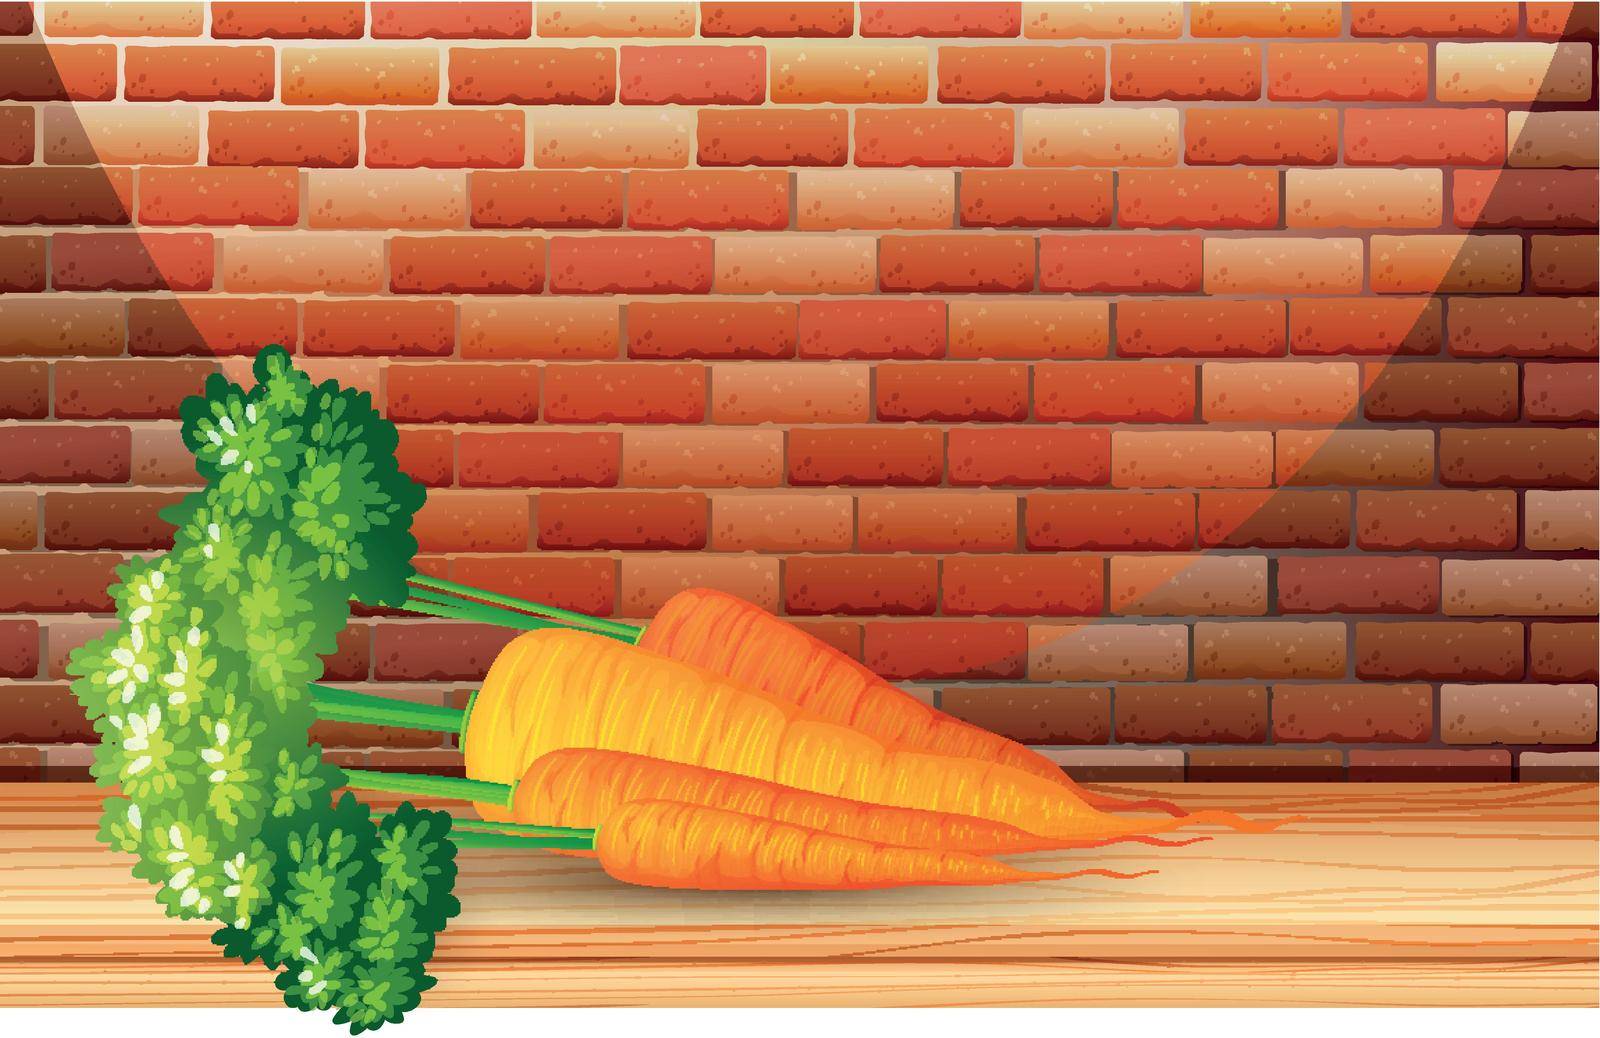 Organic Carrots with Brick Wall by iimages